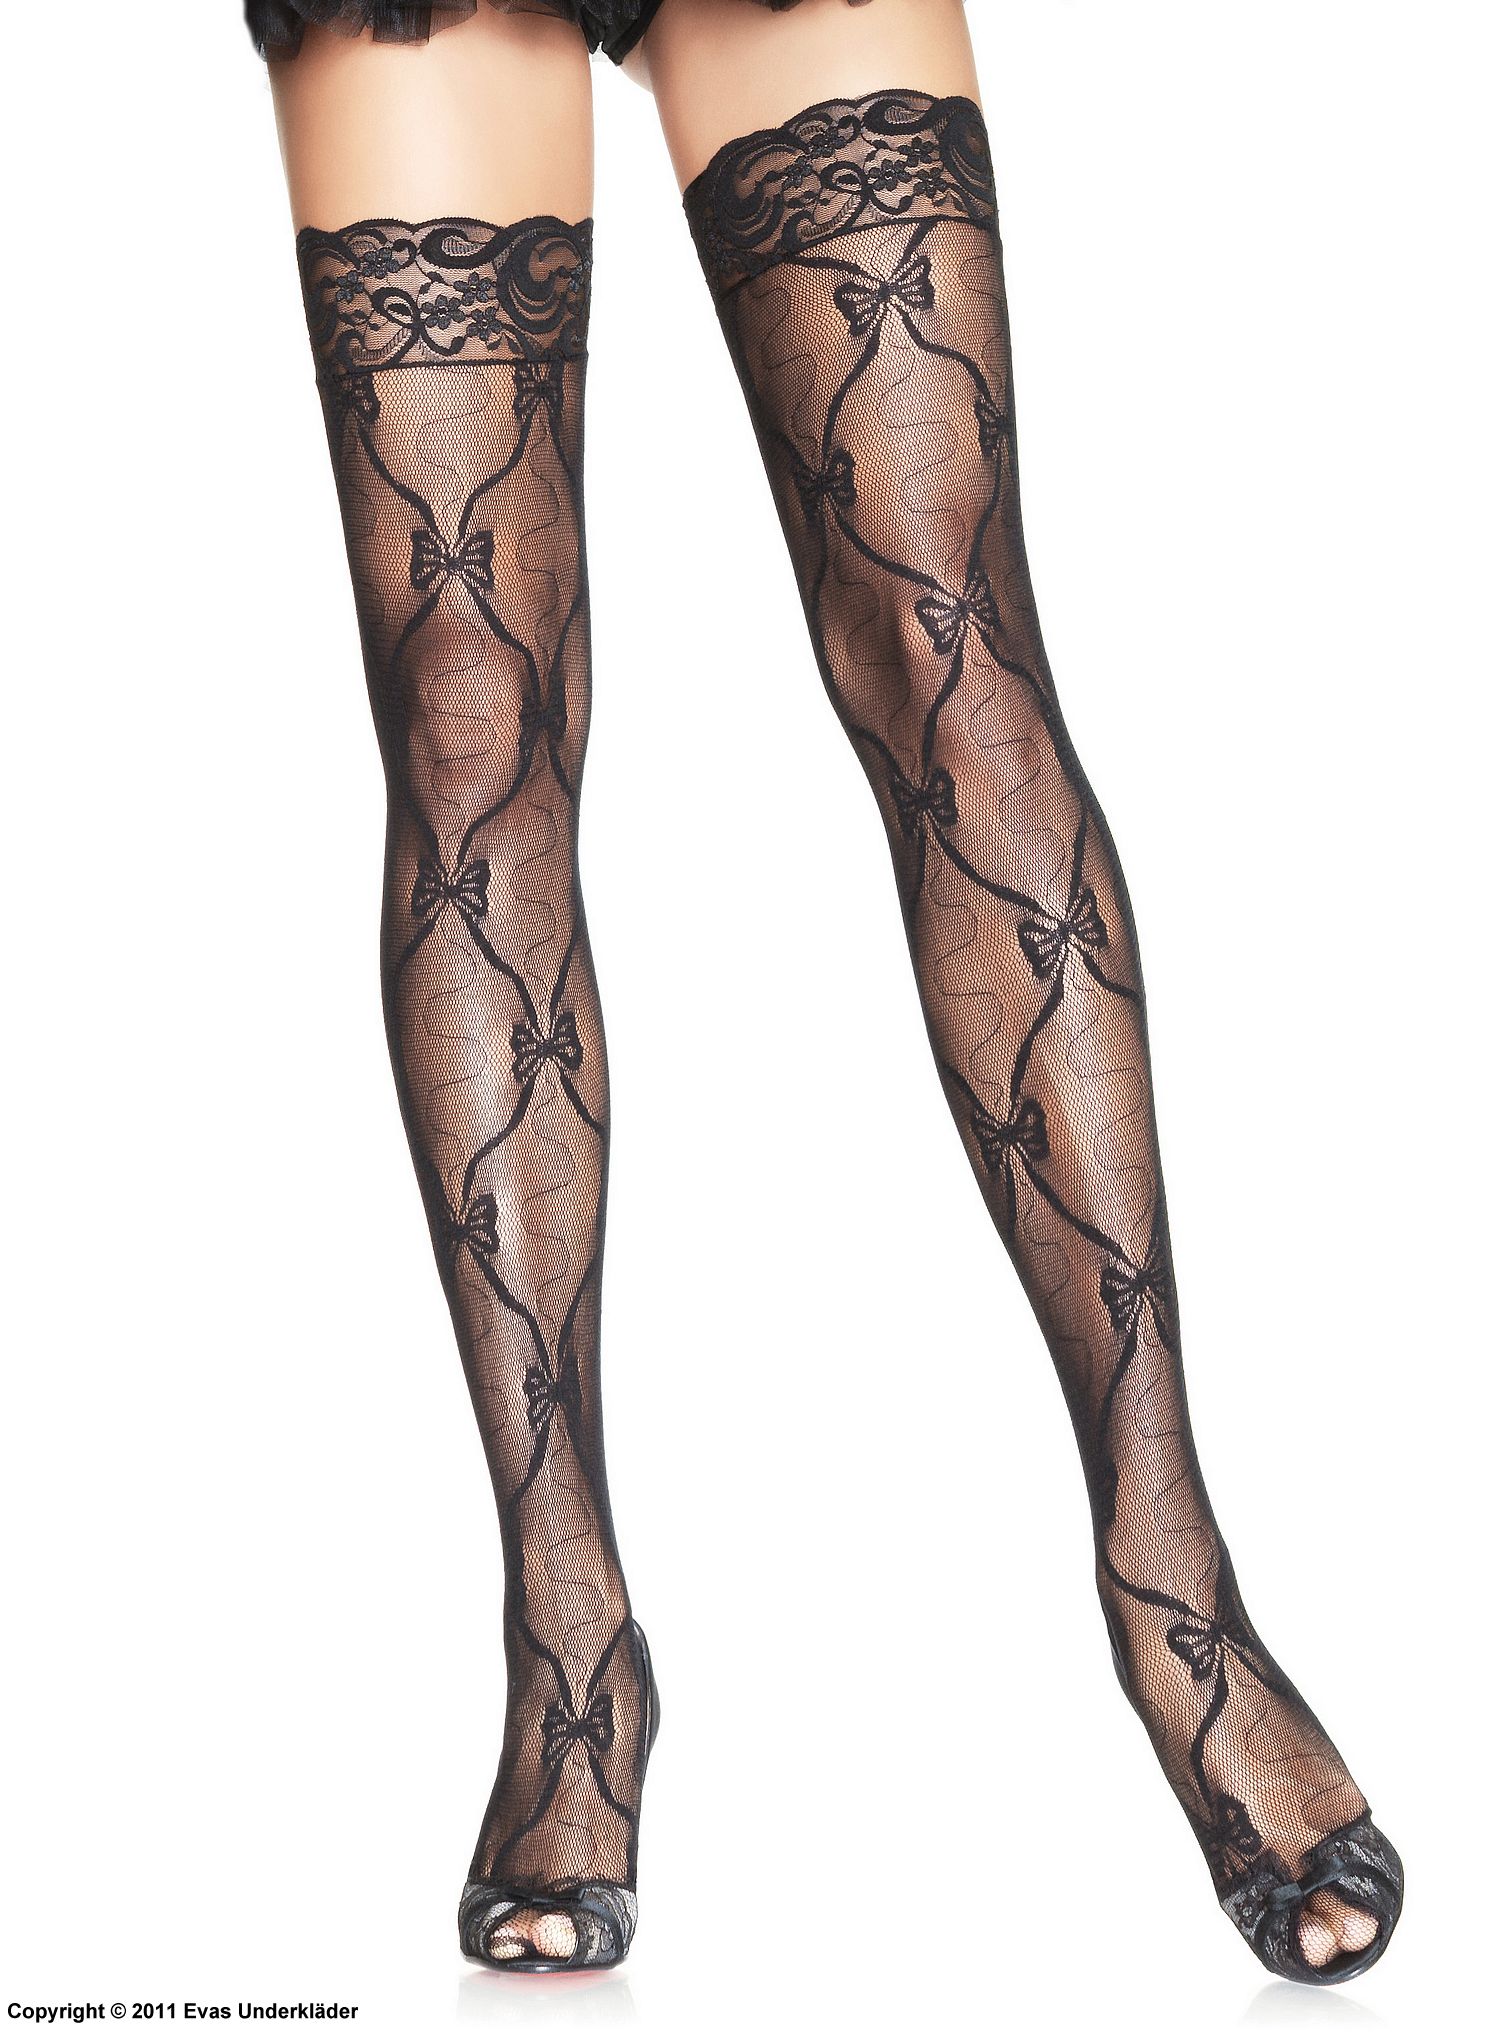 Thigh high stockings with bow patterns